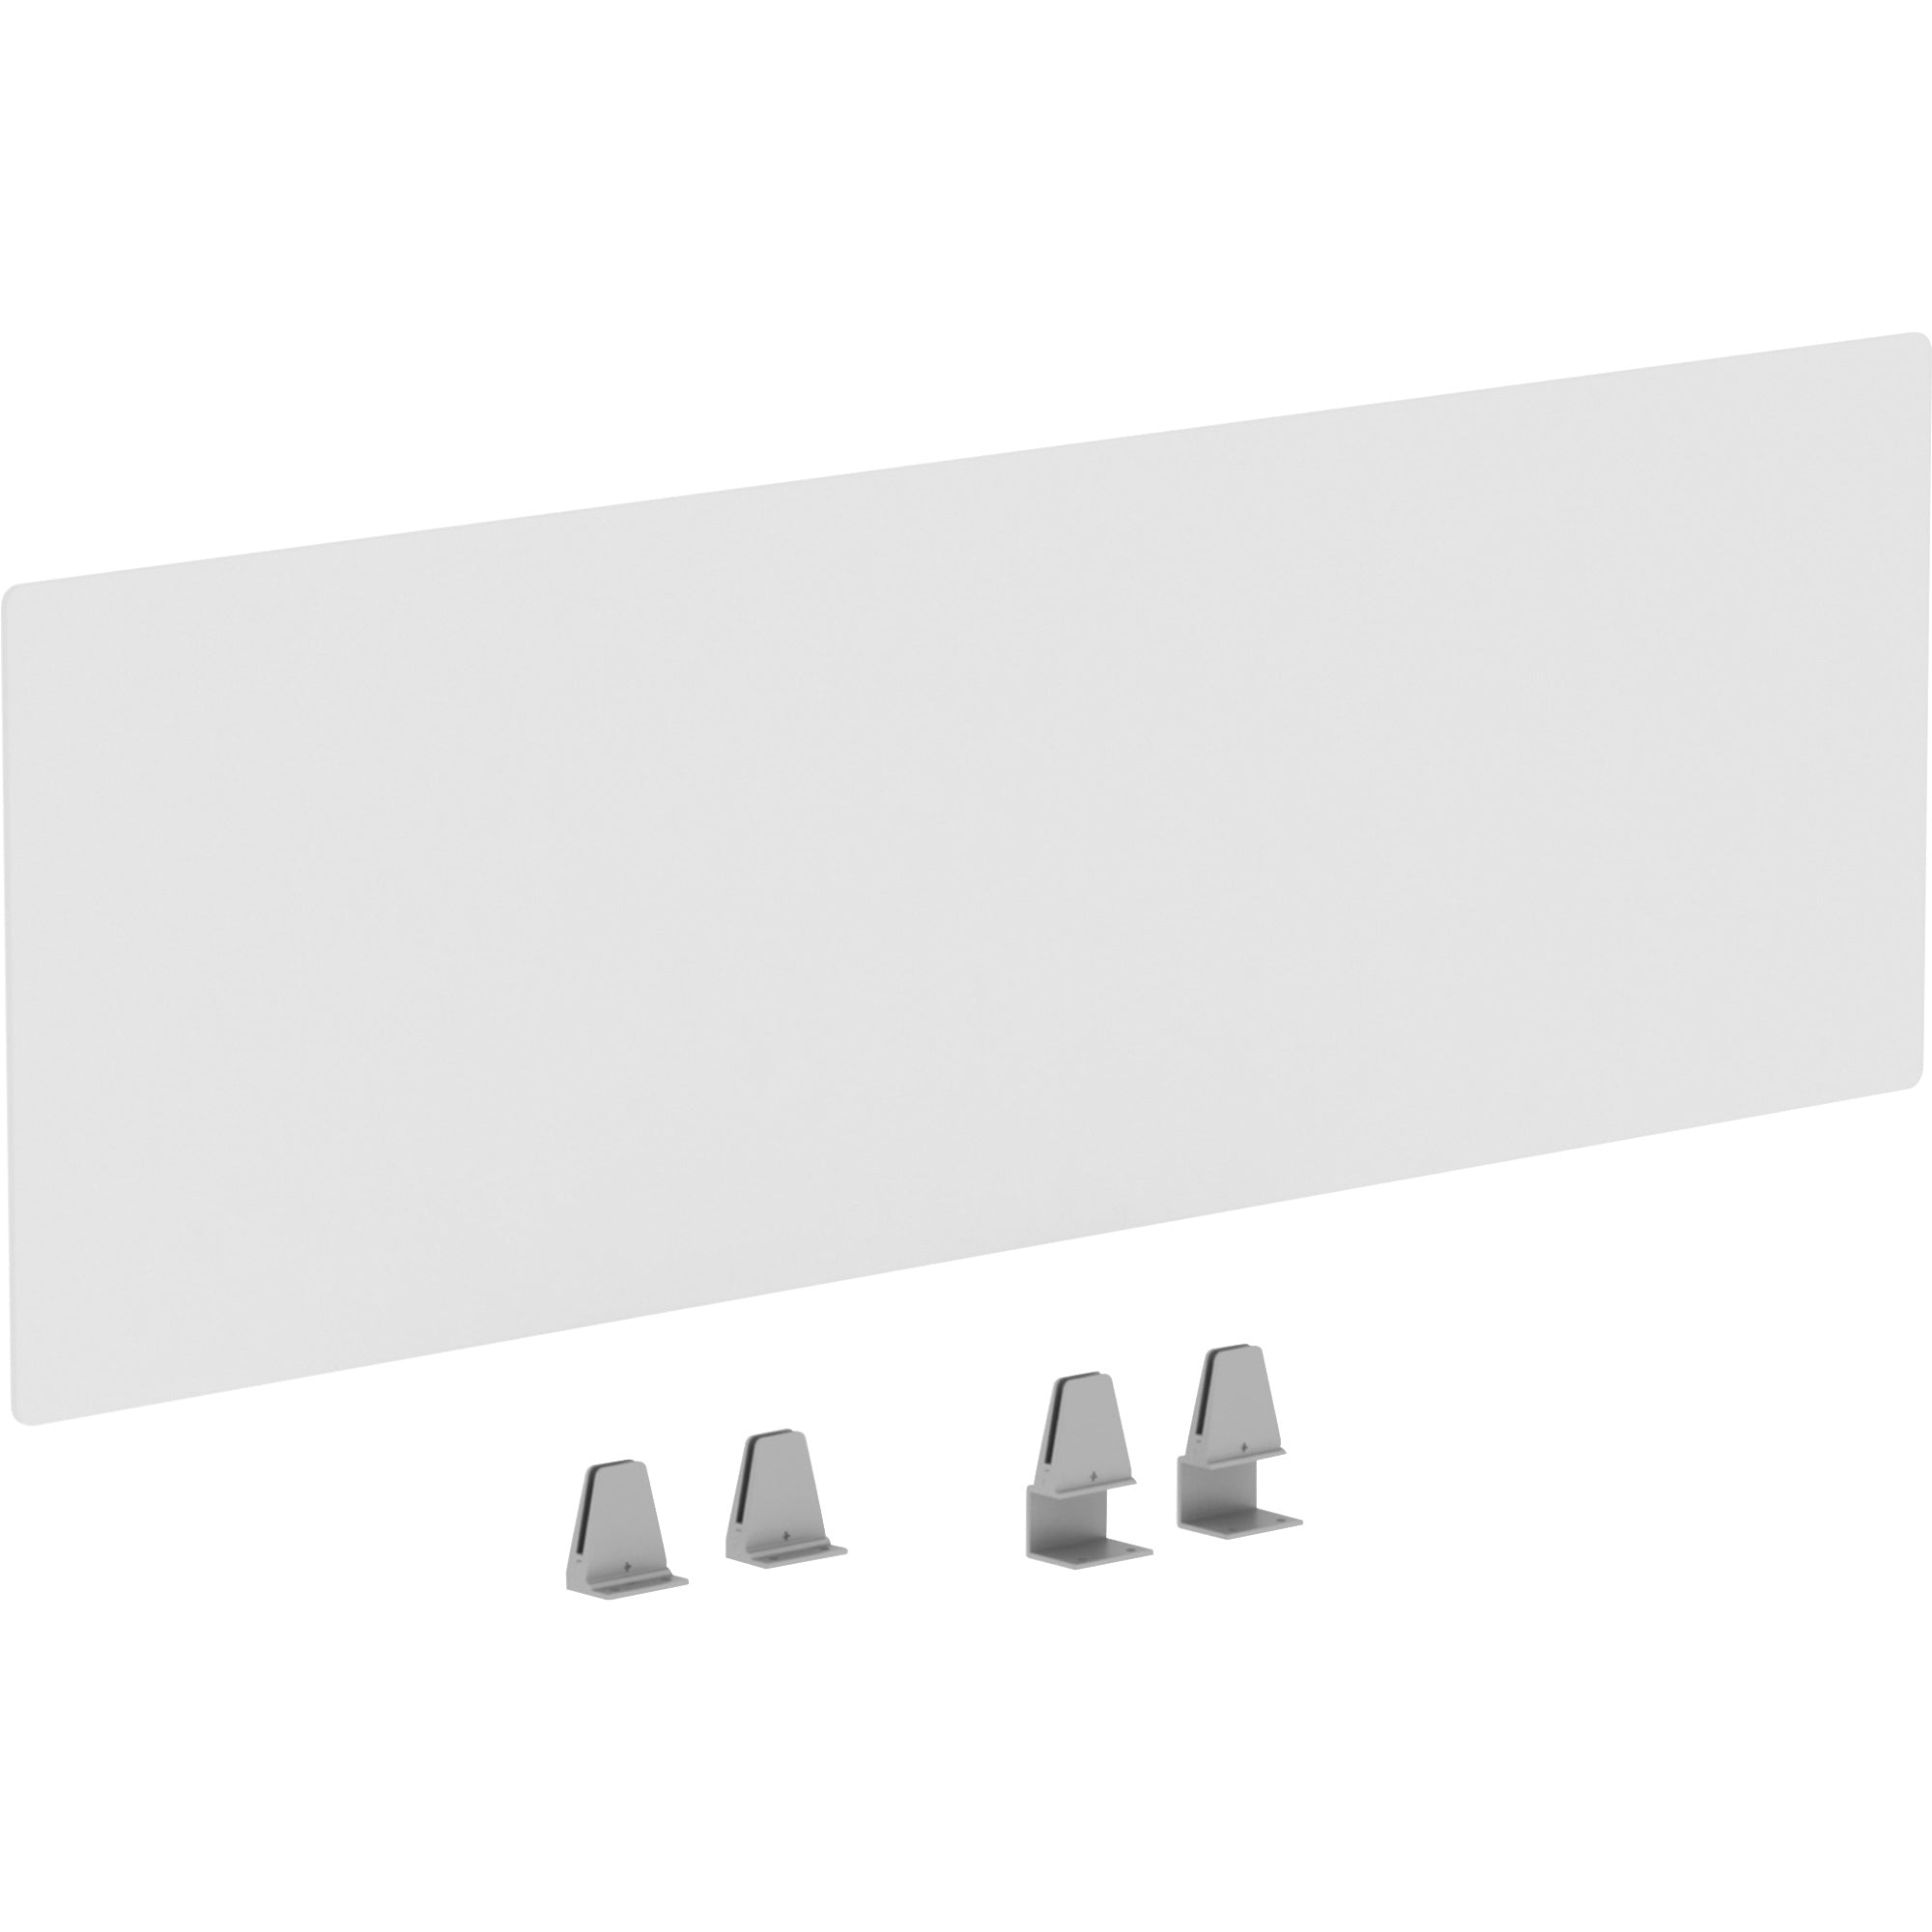 lorell-relevance-series-modesty-privacy-panel-493-width-x-158-height-clear-1-each_llr16220 - 4